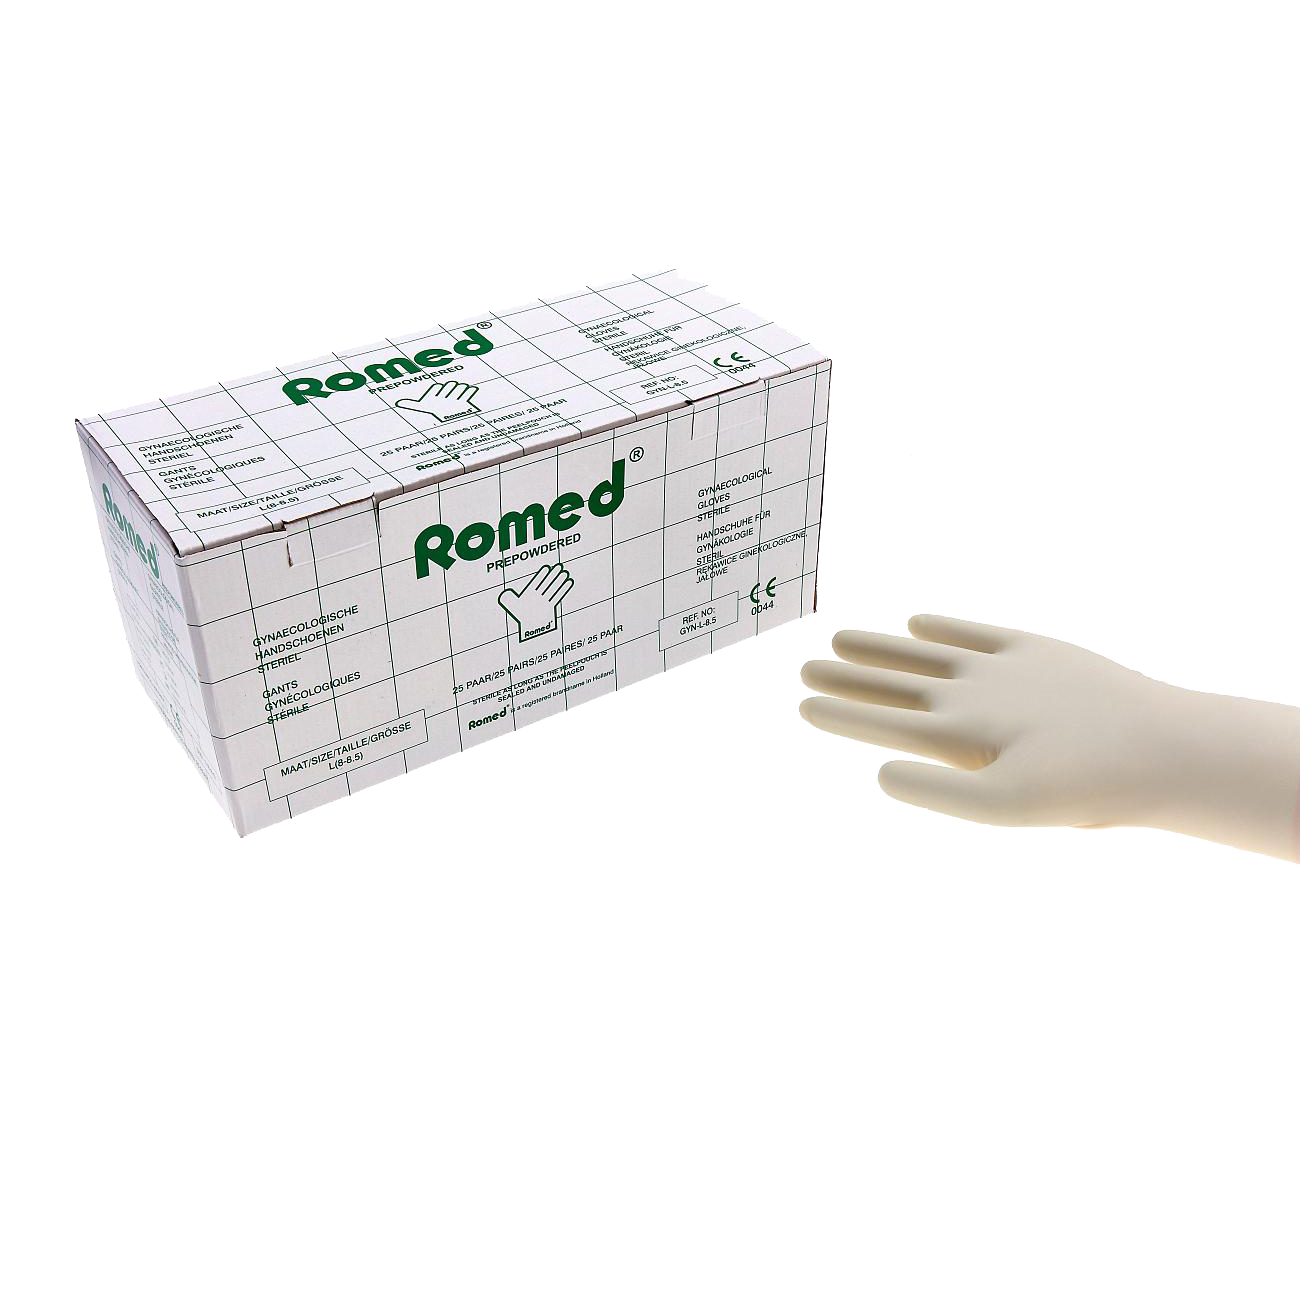 Romed Gynecological glove sterile 25 pair - 123disposables.com